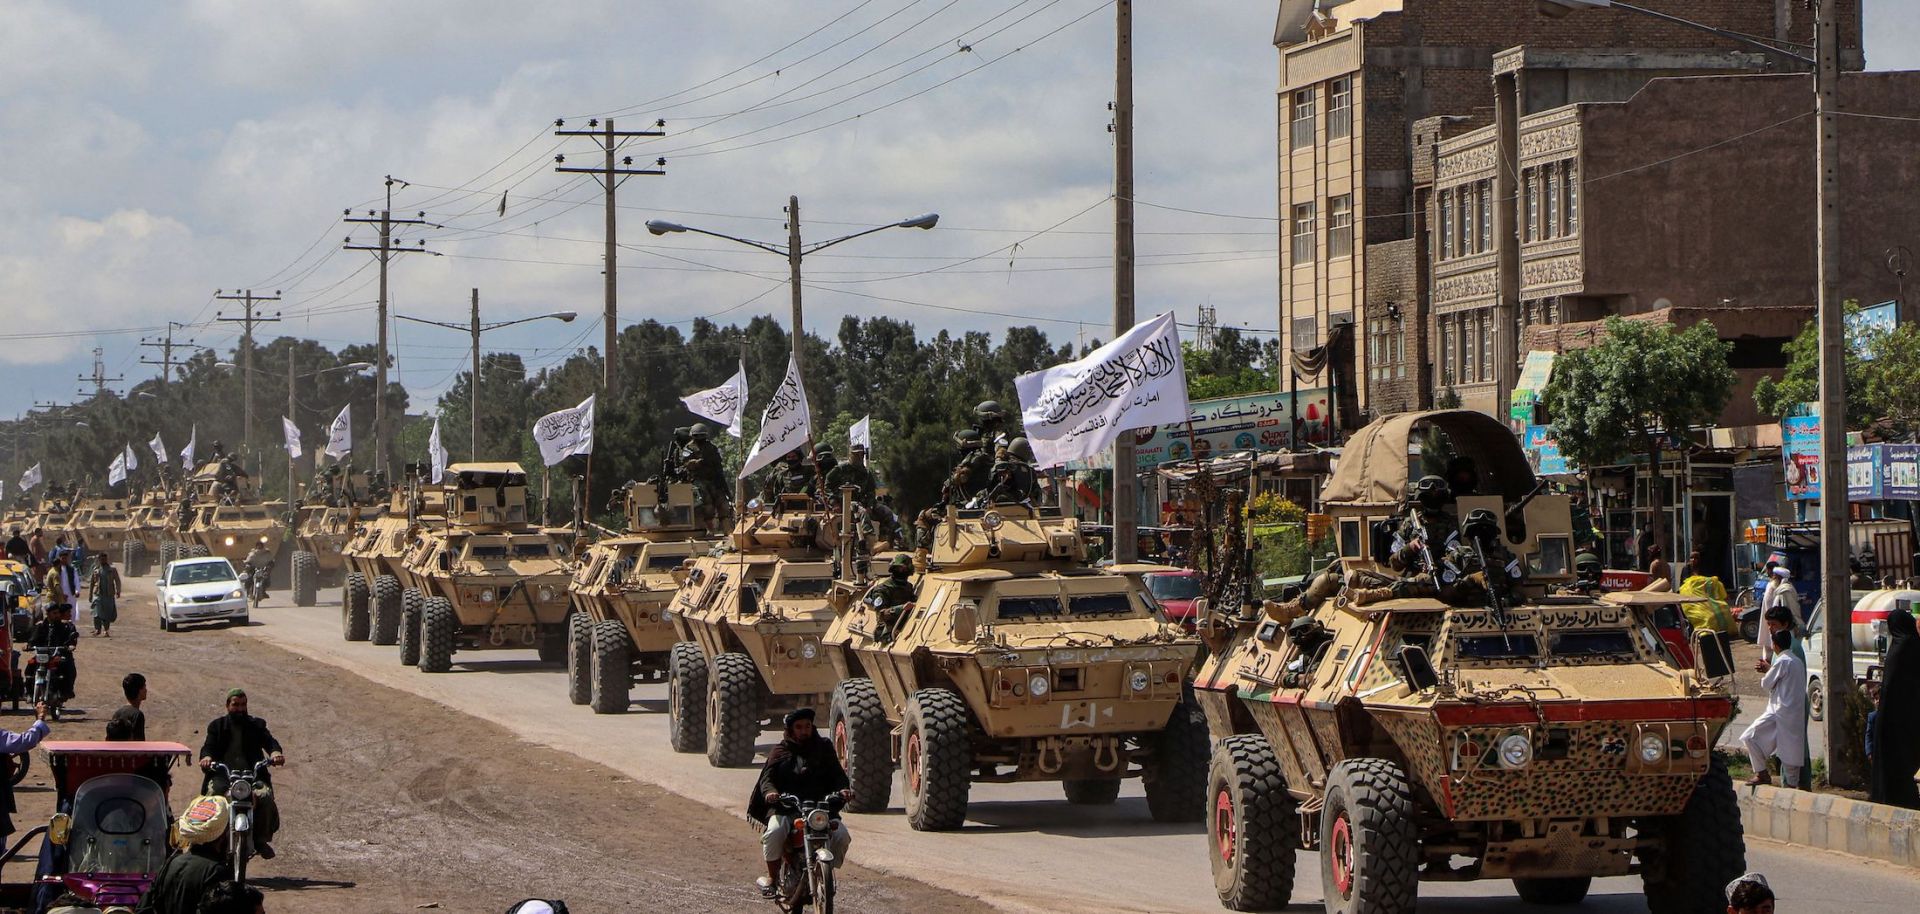 Taliban fighters in armored vehicles in a military parade on April 19, 2022, in Herat, Afghanistan.